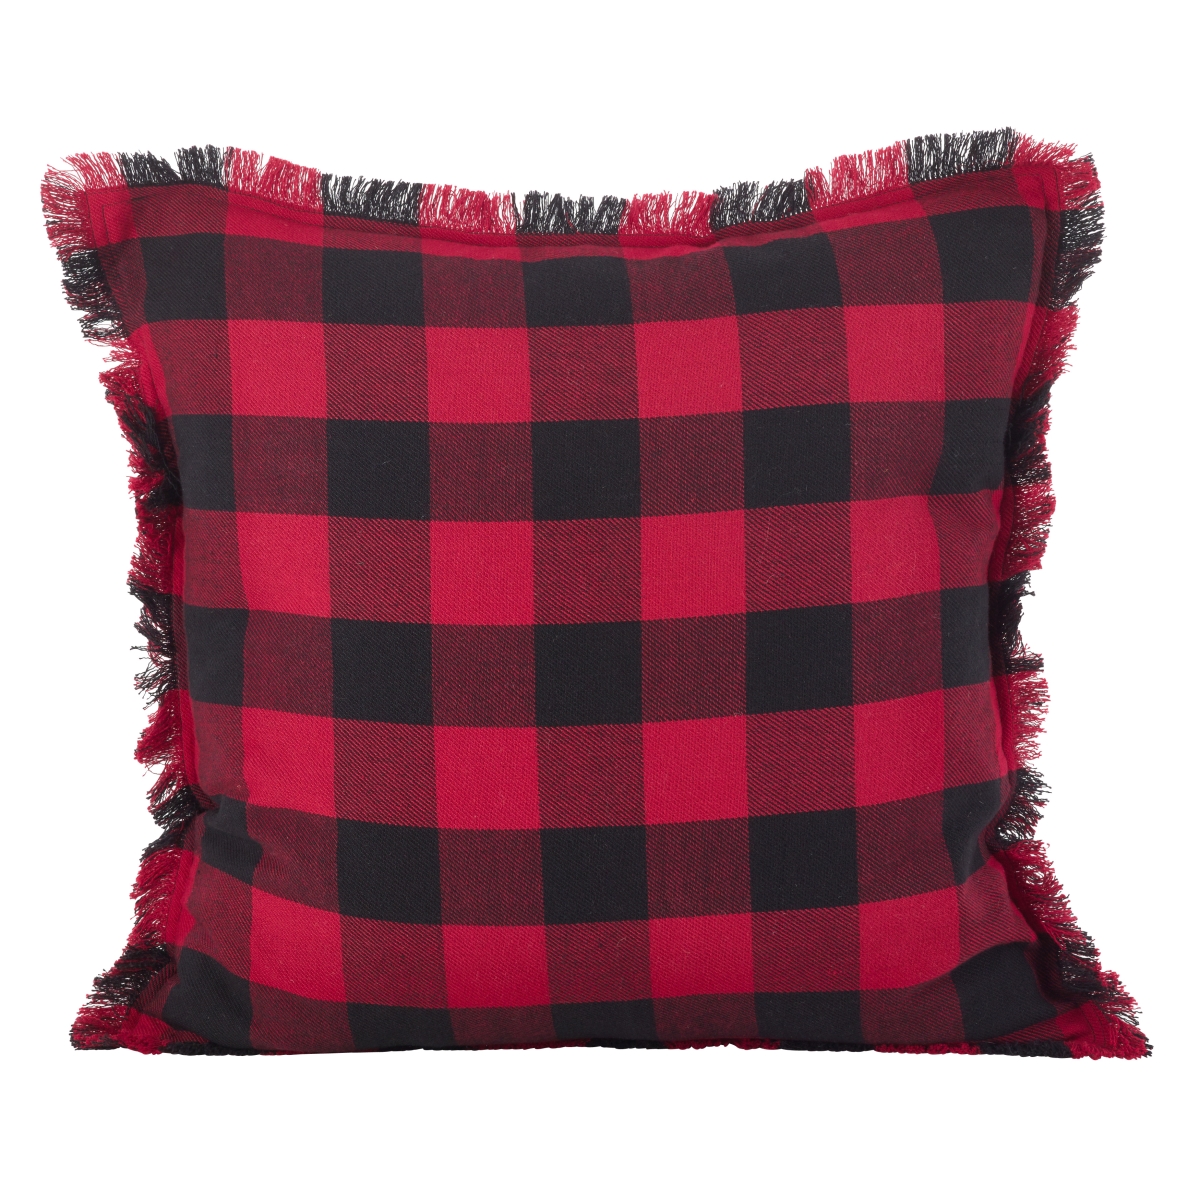 Picture of SARO 9026P.R20S 20 in. Square Fringed Buffalo Plaid Design Cotton Throw Pillow with Down Filling  Red